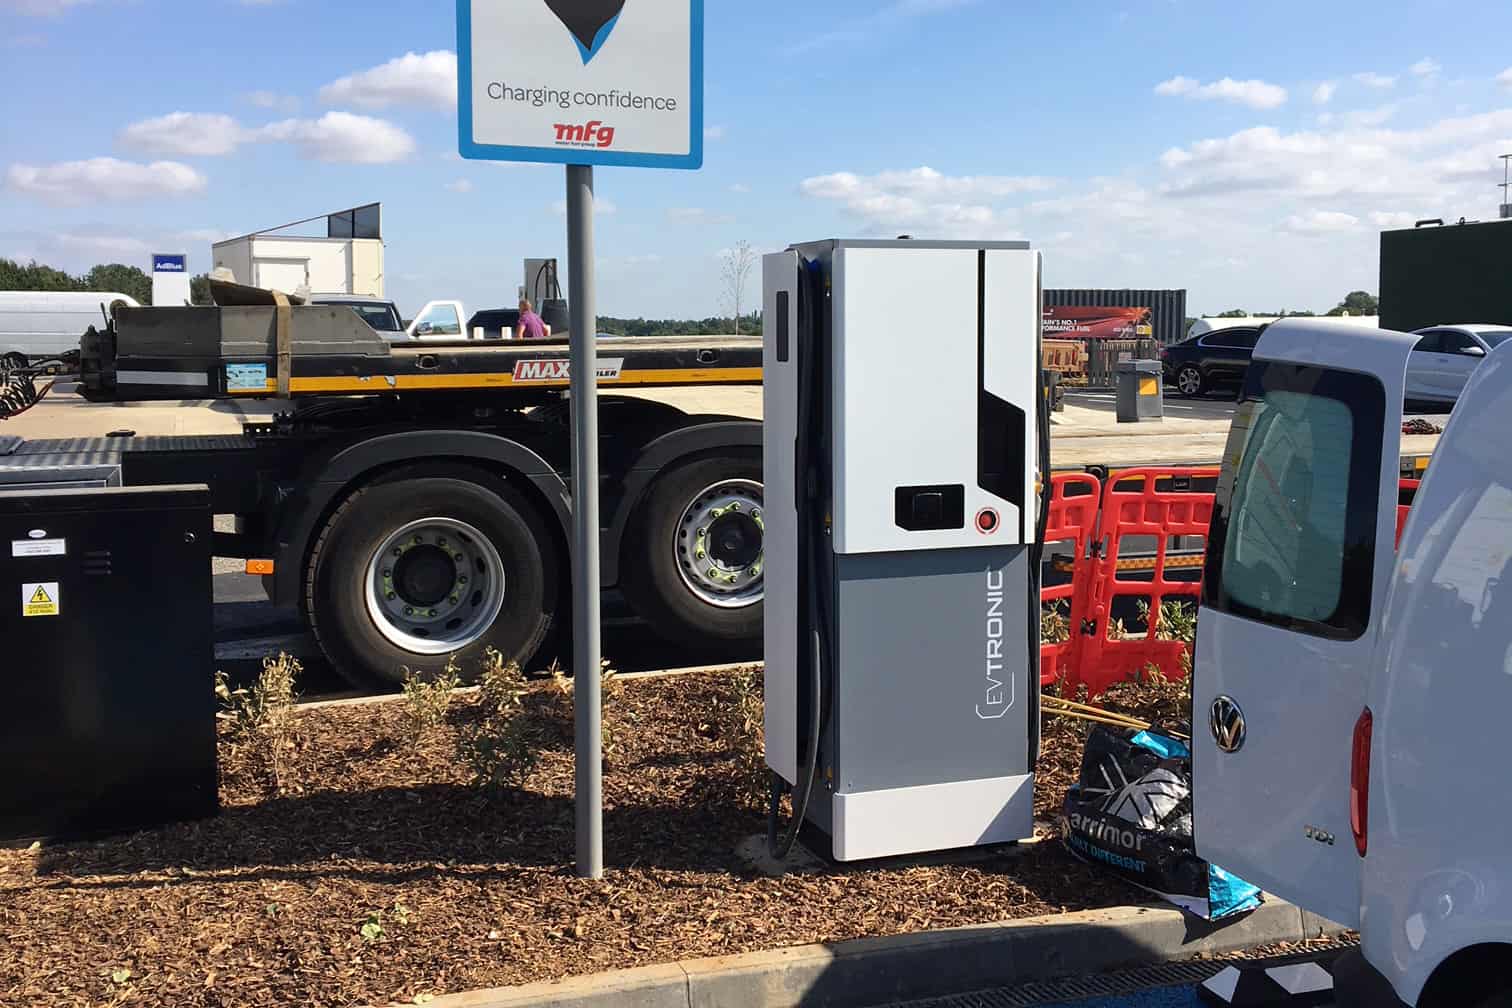 eSmart Networks were appointed by Engie EV Solutions to install a 50KW rapid, on a major route as part of the Genie Point roll out of rapid chargers.